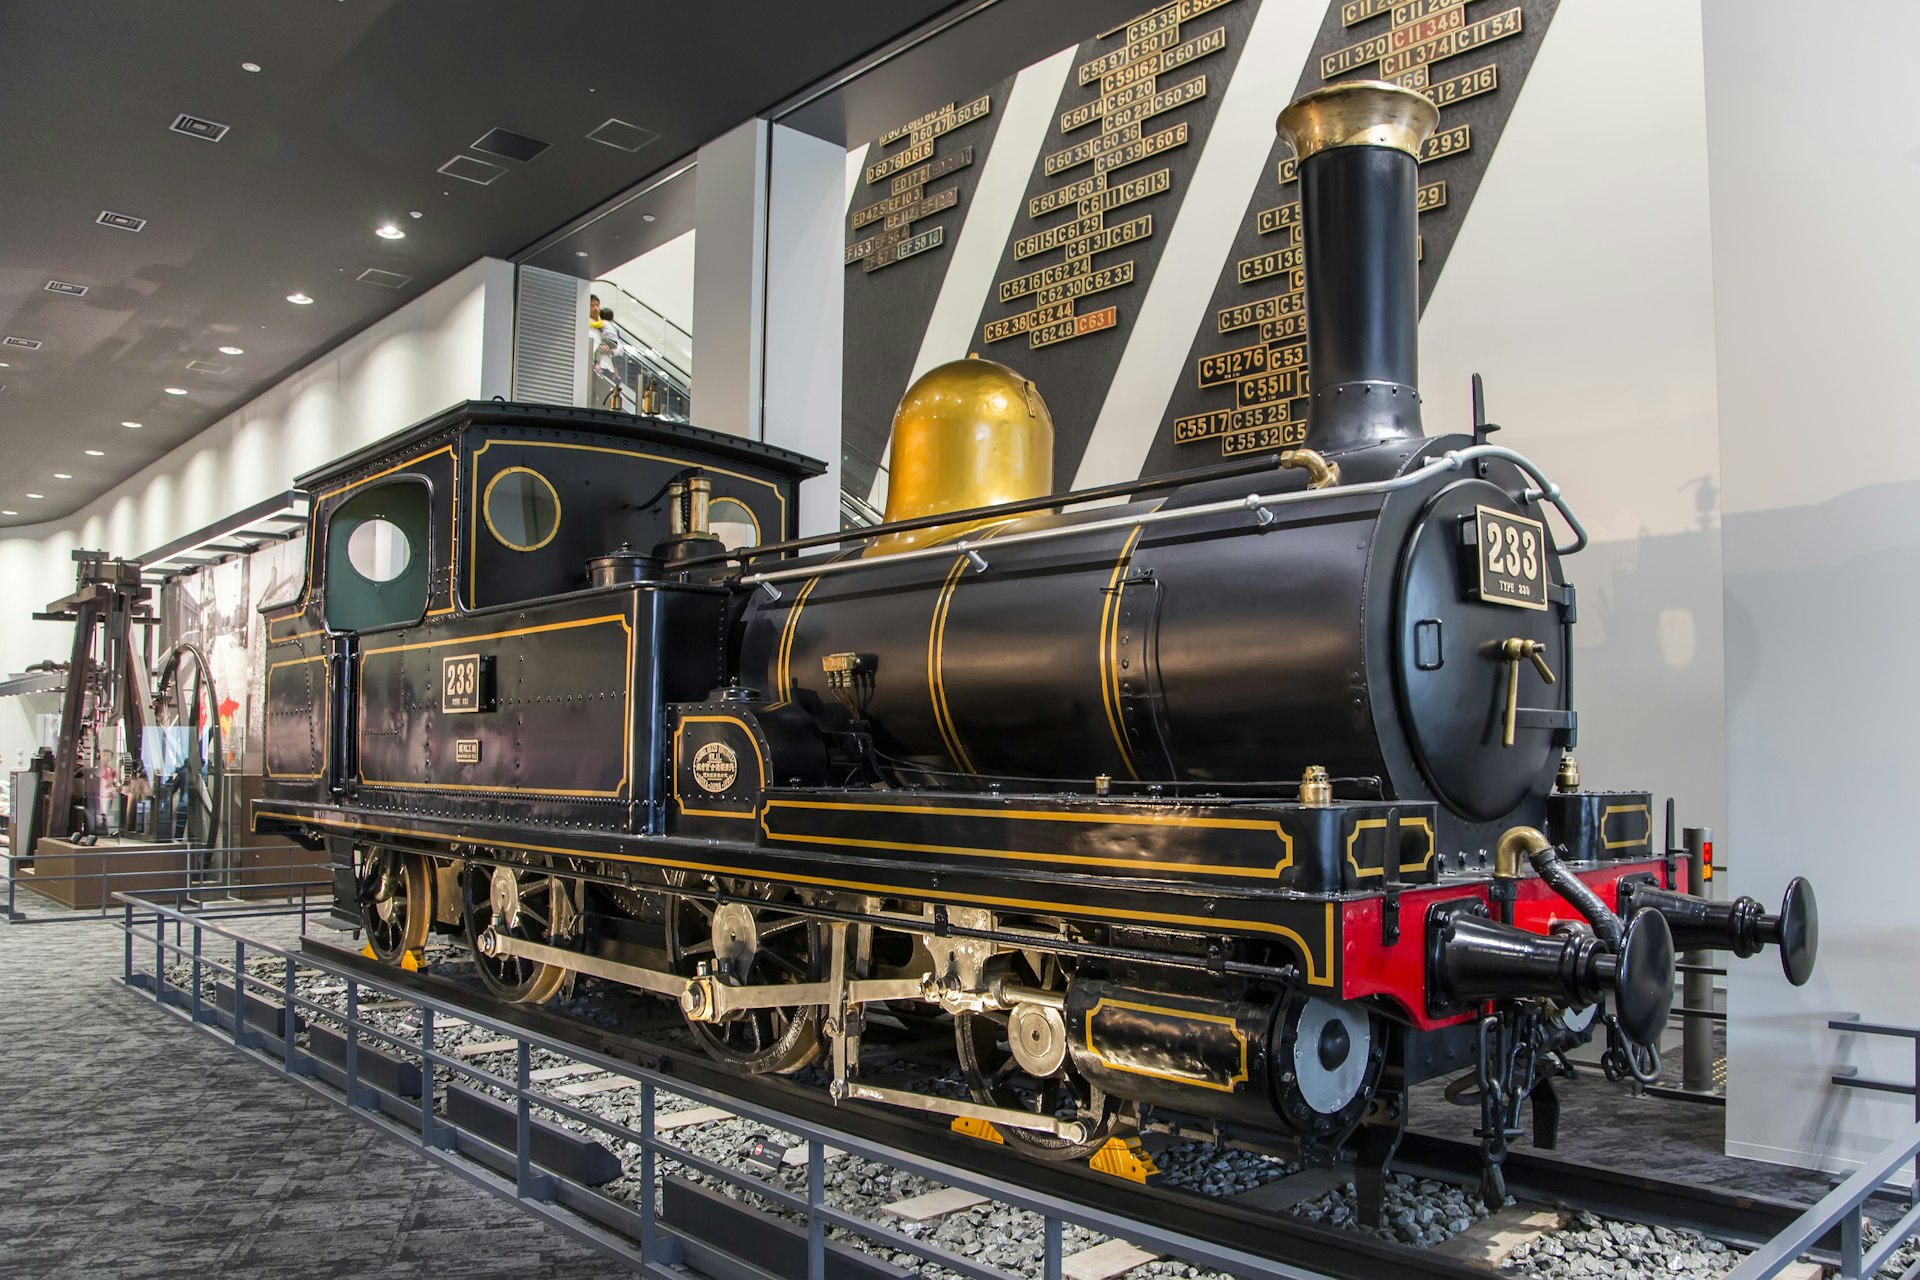 A class 230 steam locomotive at Kyoto railway museum in Japan